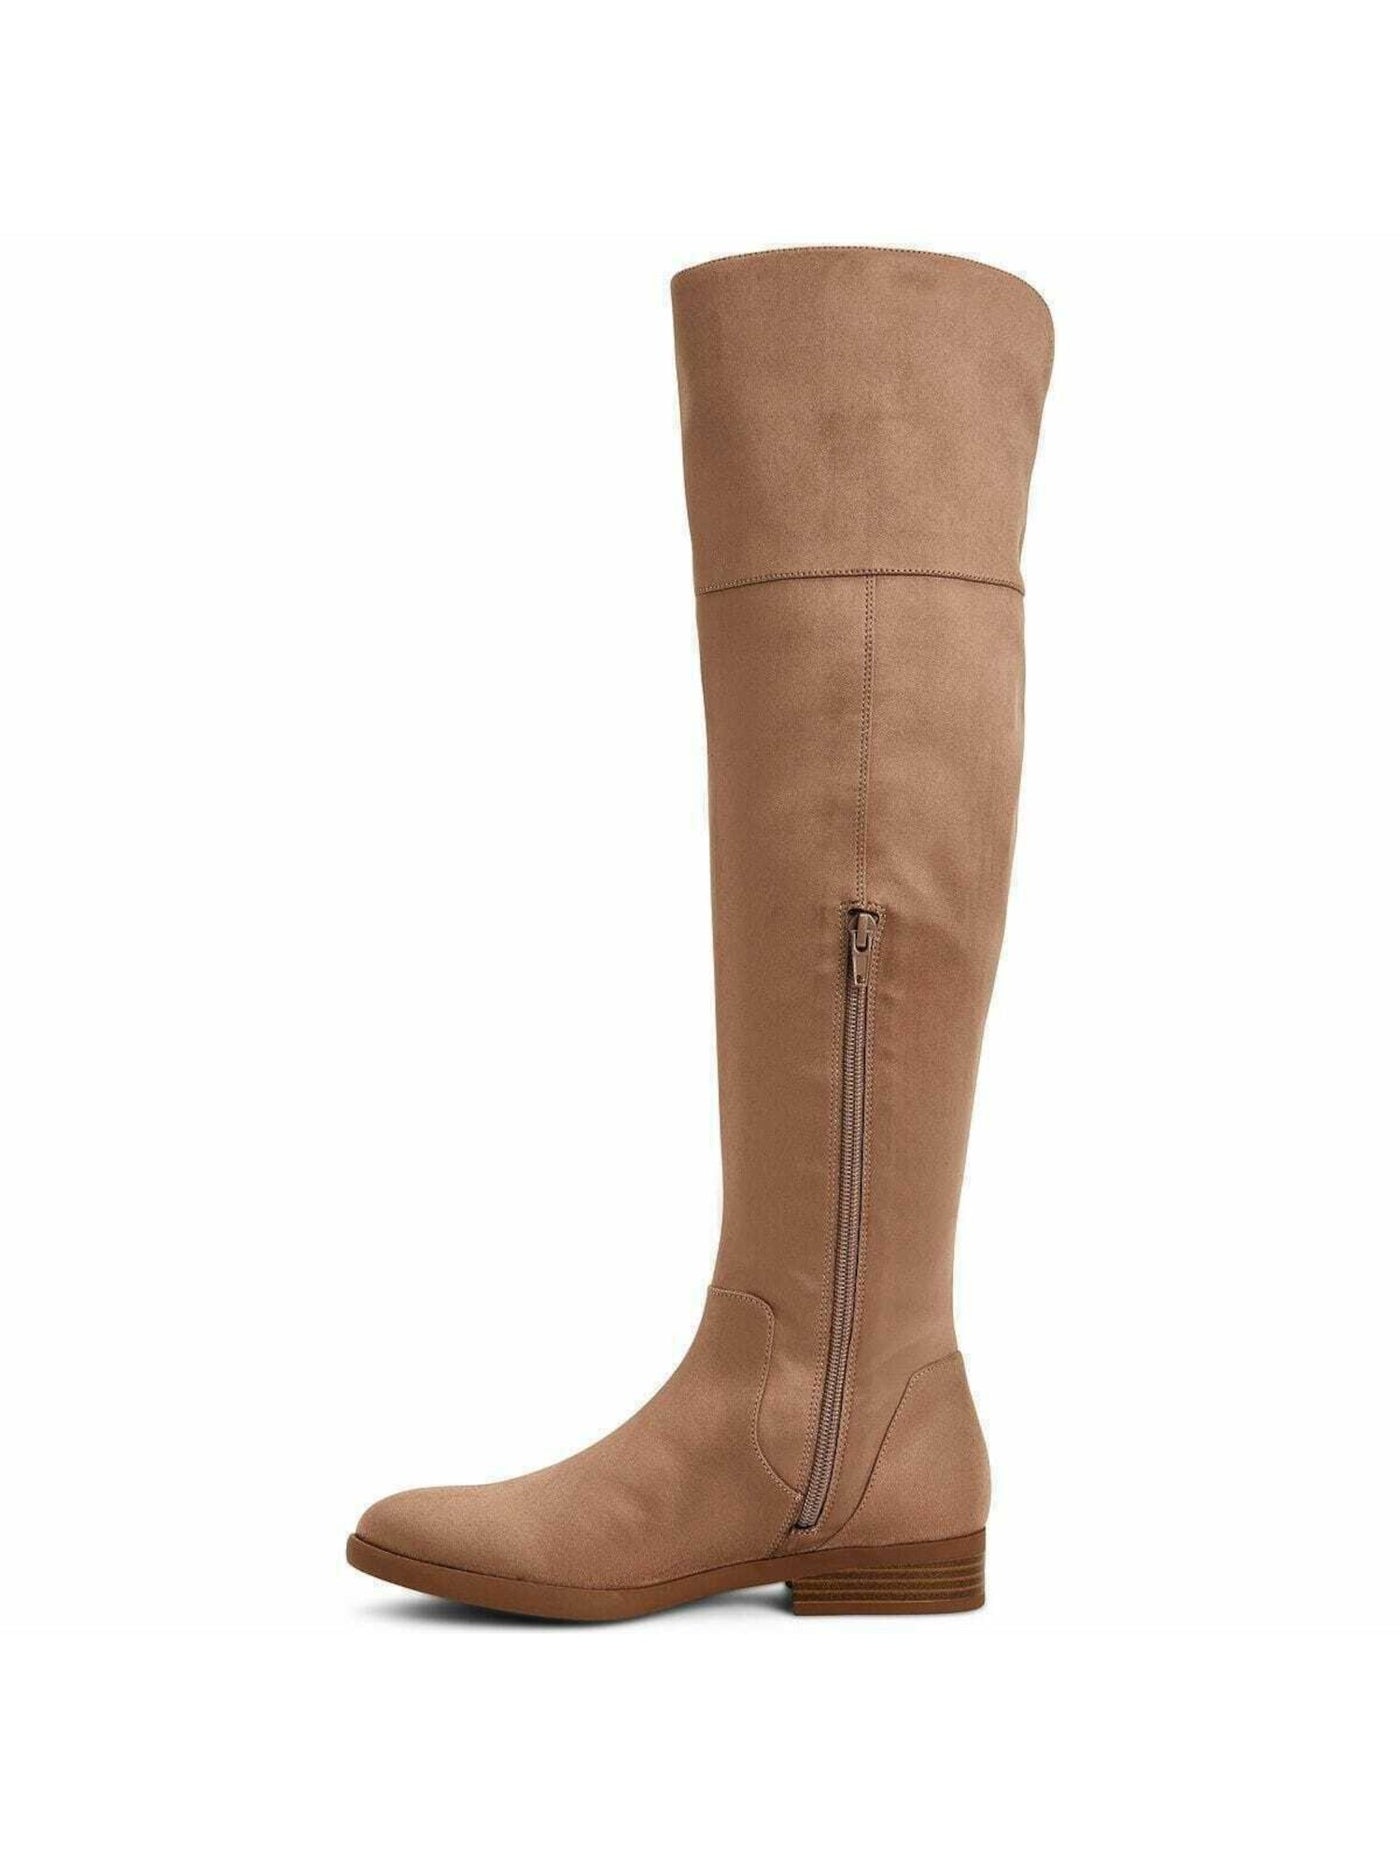 STYLE & COMPANY Womens Beige Round Toe Stacked Heel Zip-Up Dress Boots Shoes M